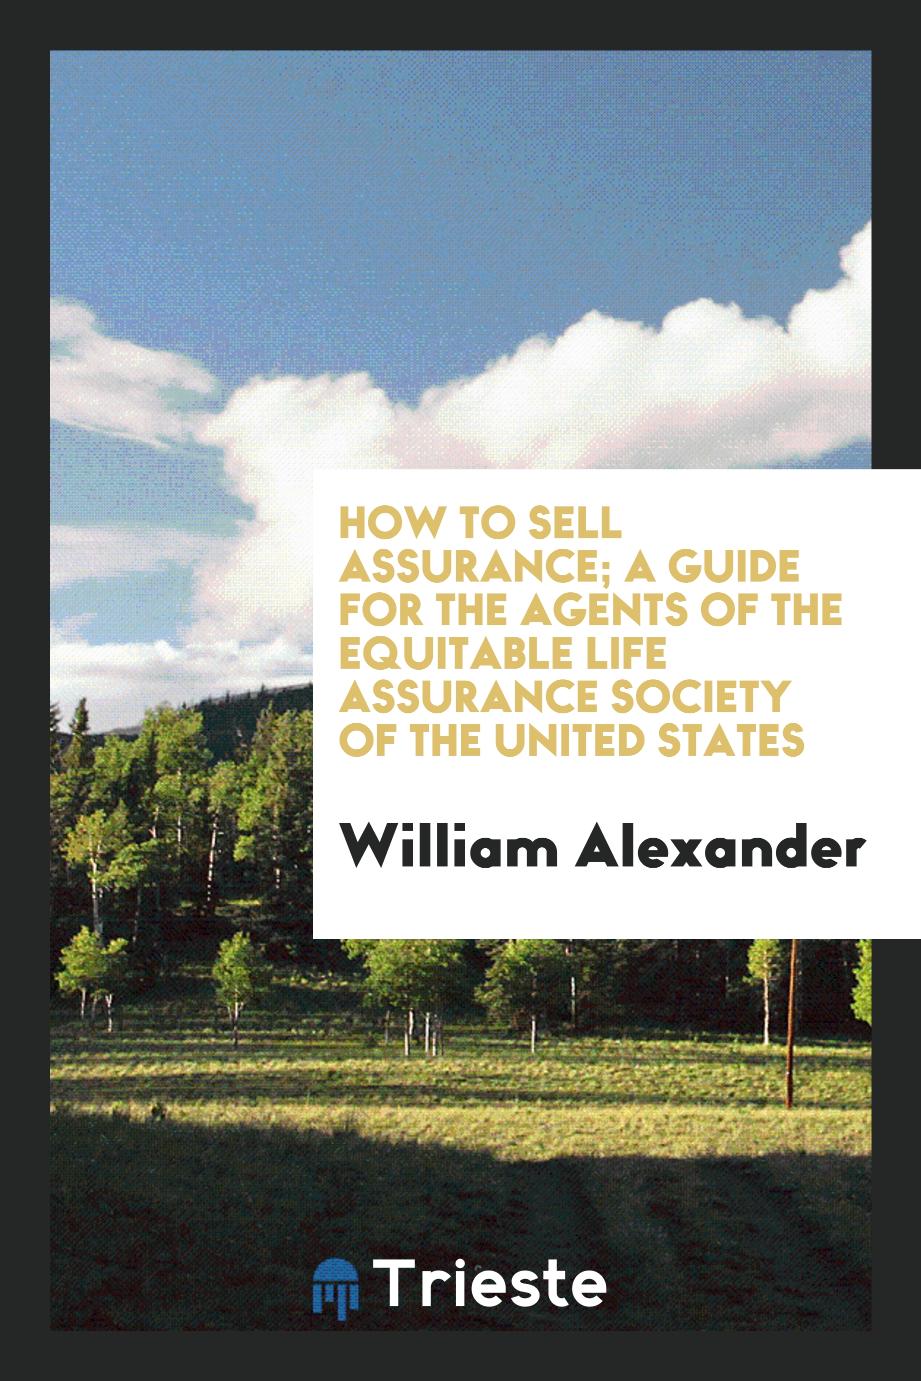 How to sell assurance; a guide for the agents of the Equitable life assurance society of the United States